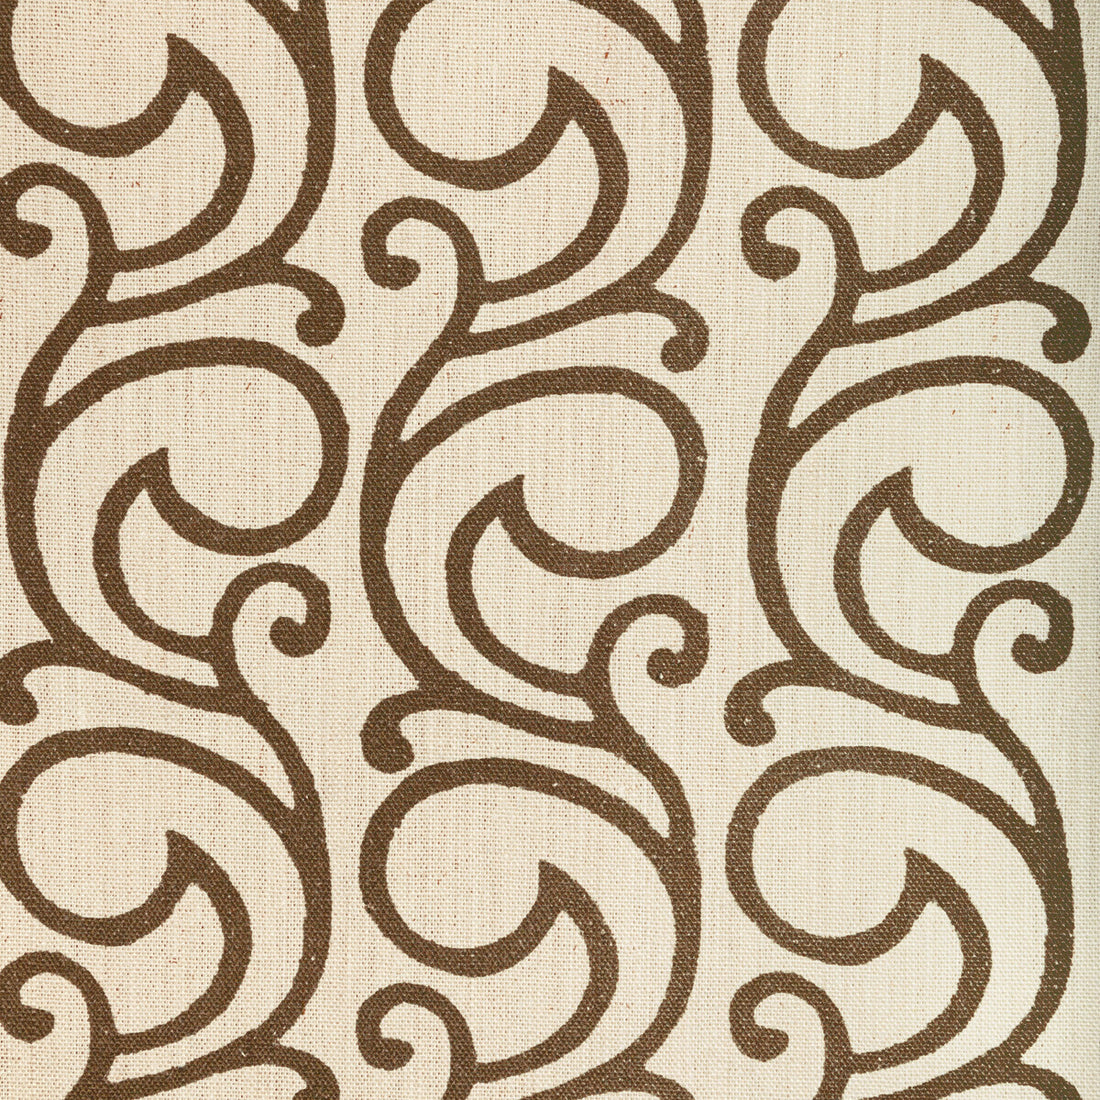 Serendipity Scroll fabric in tea color - pattern 2022103.6.0 - by Lee Jofa in the Sarah Bartholomew collection